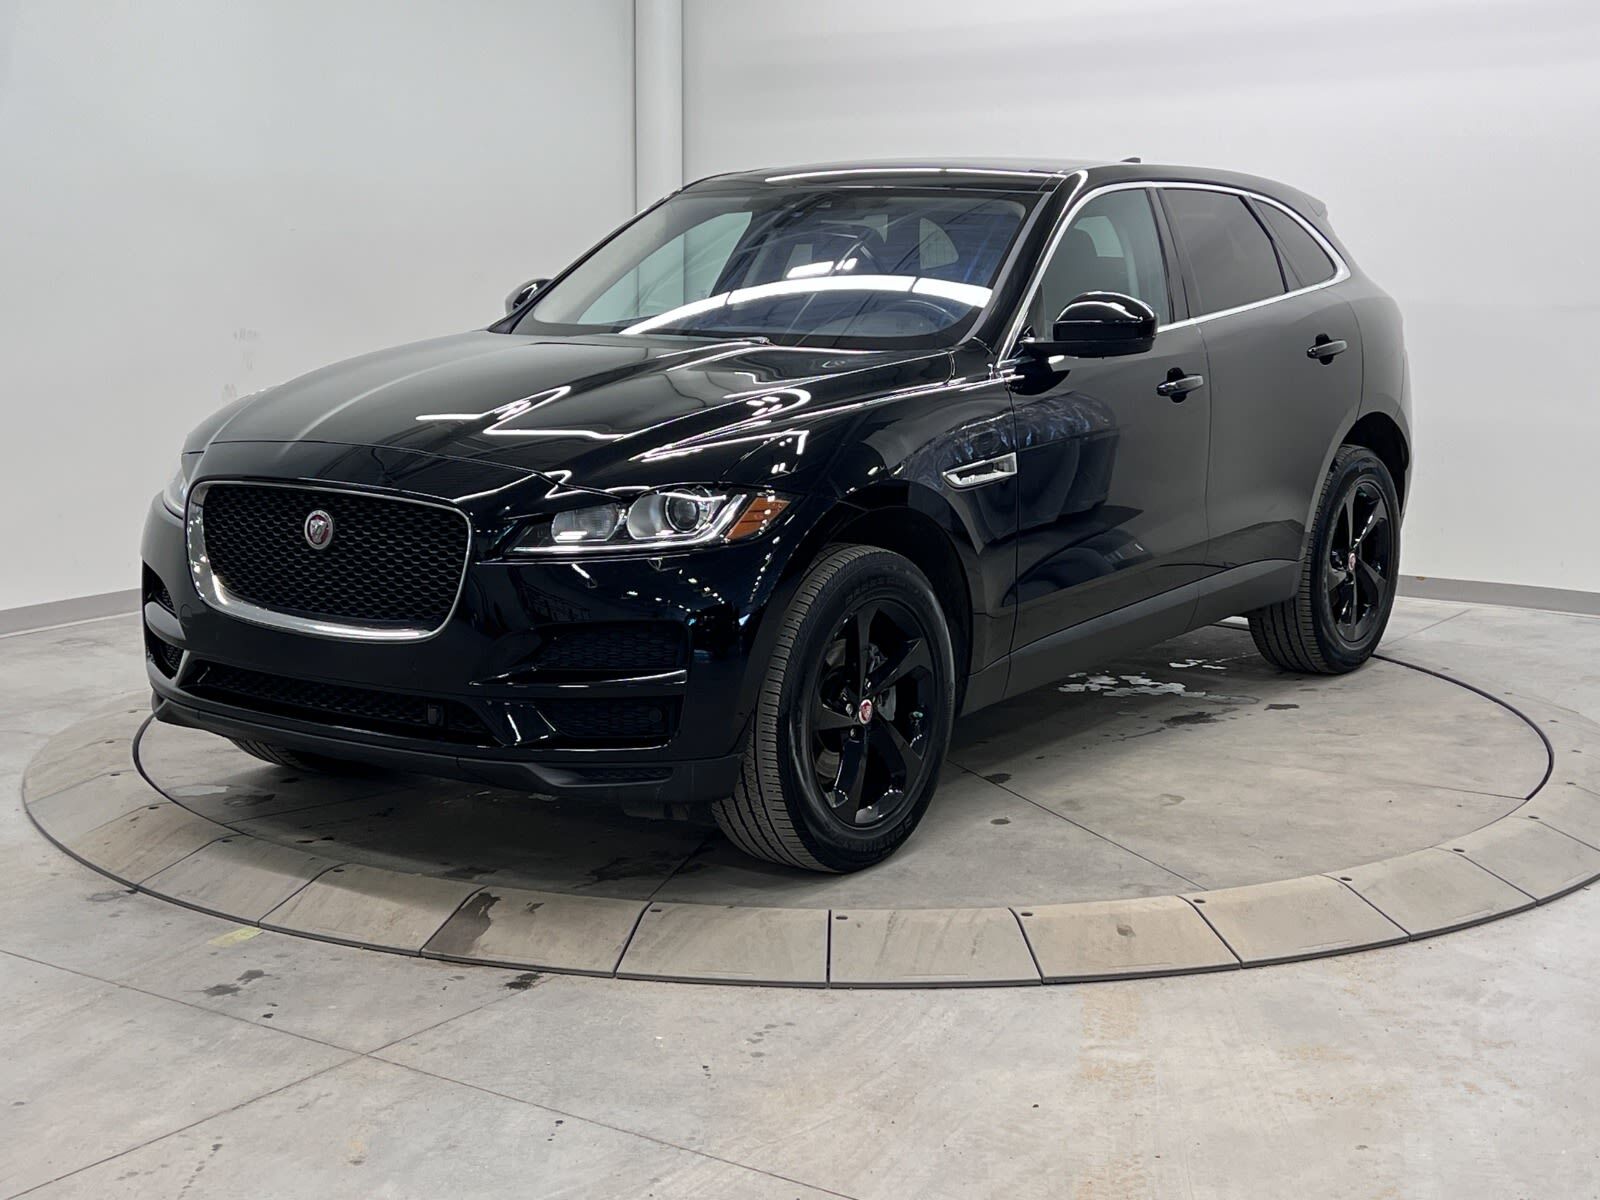 2020 Jaguar F-Pace CERTIFIED PRE OWNED RATES AS LOW AS 3.99%